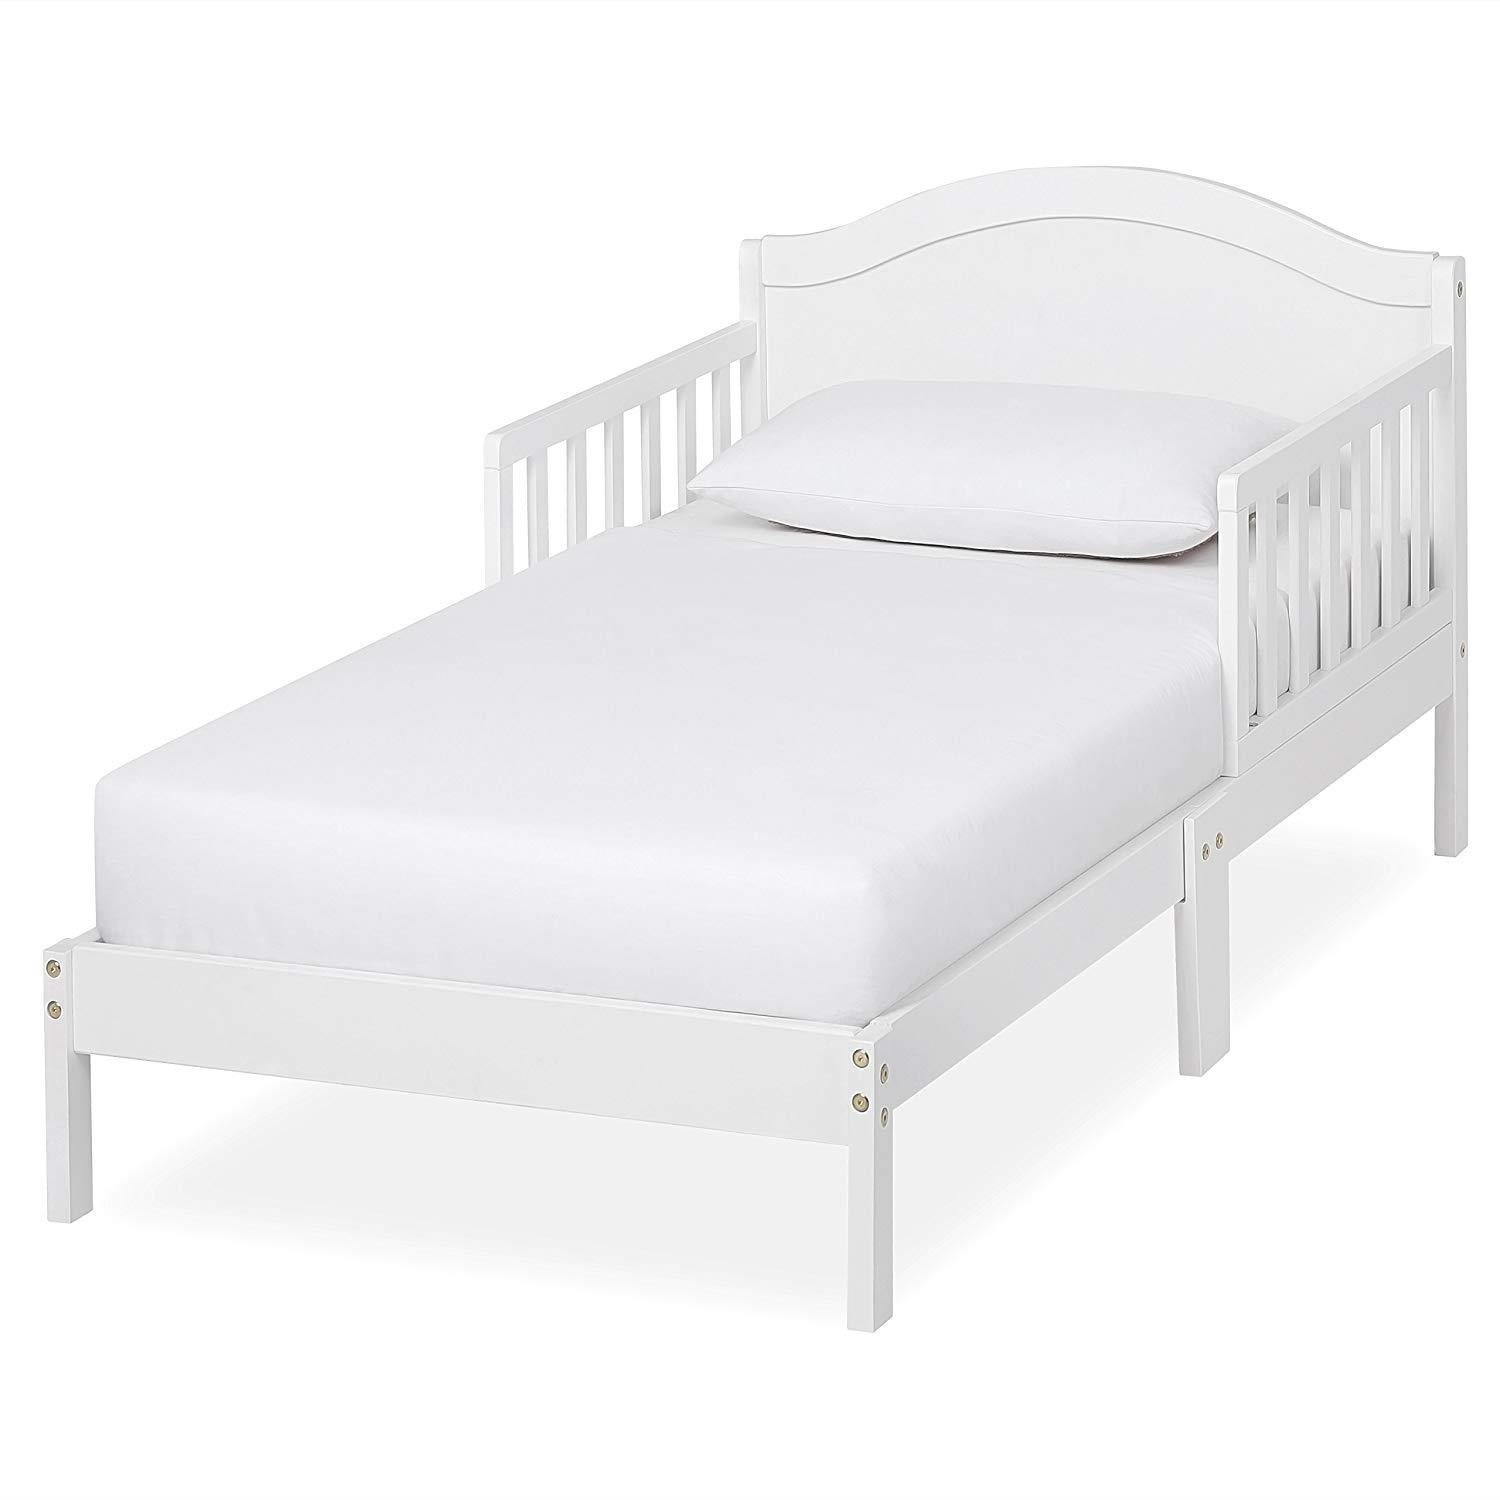 Photo 1 of Dream On Me Sydney Toddler Bed in White Greenguard Gold Certified
MISSING HARDWARE BUY AS ISNO RETURNS